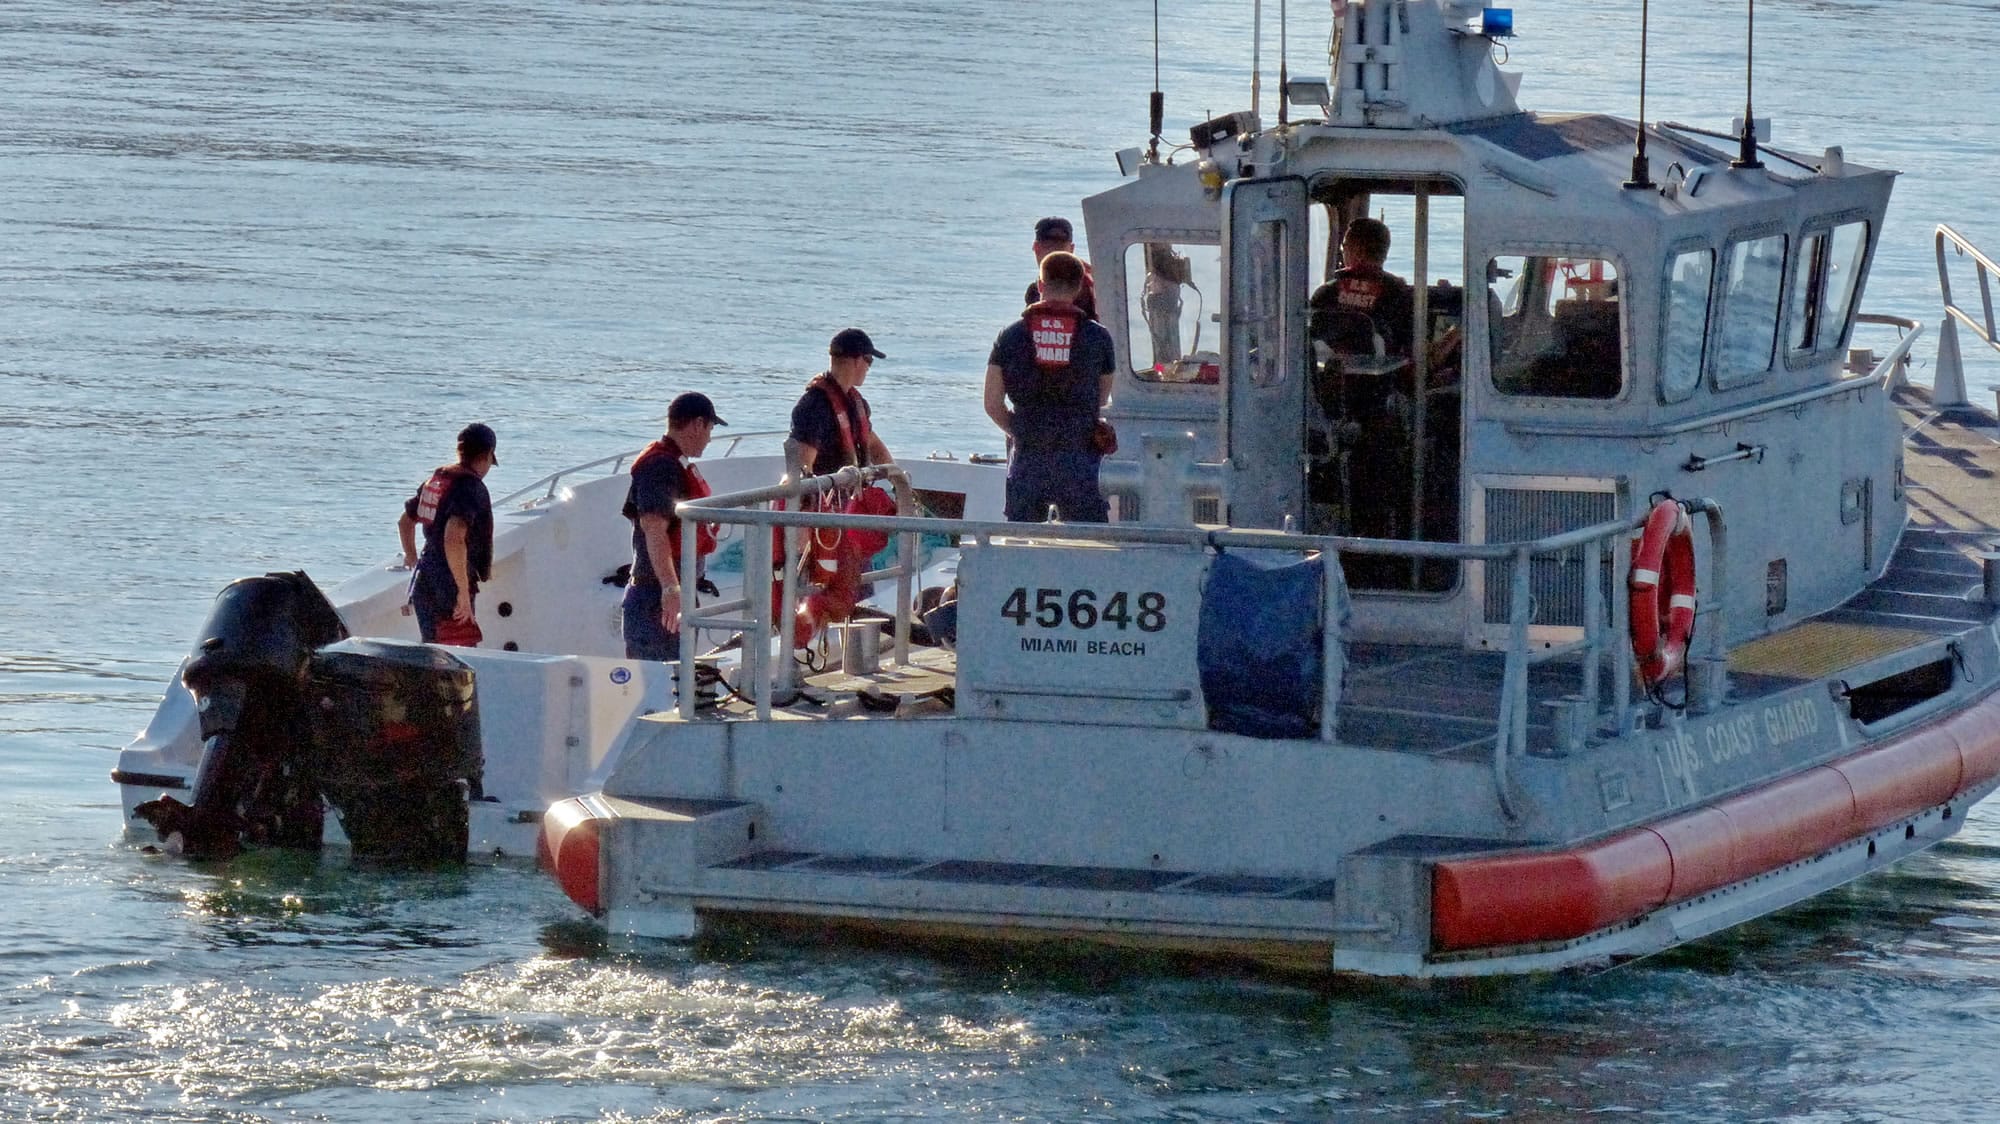 U.S Coast Guard personnel investigate a vessel with a missing center console that capsized near Miami on Wednesday.